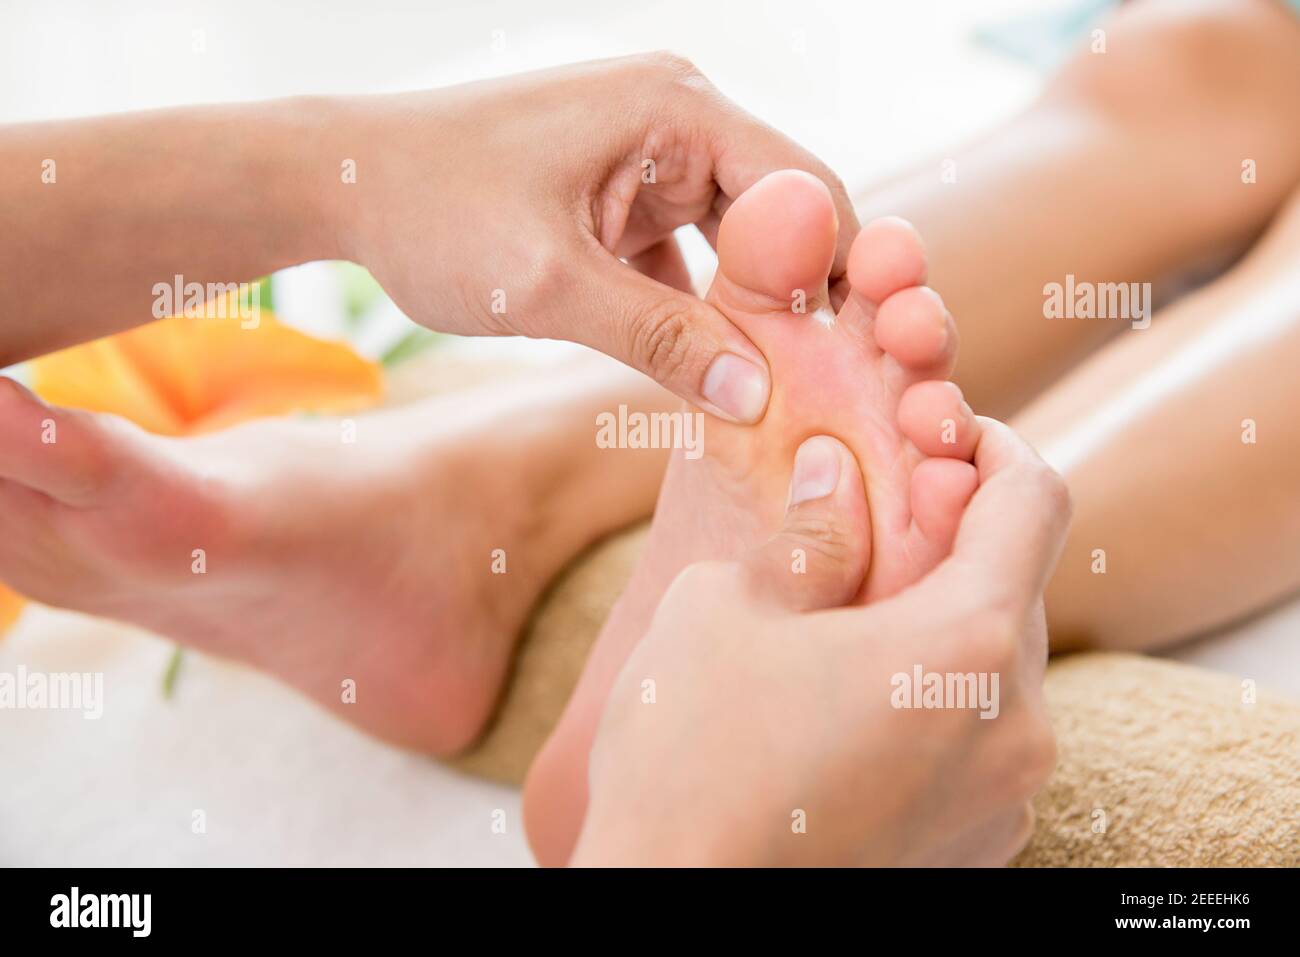 Professional therapist giving relaxing reflexology traditional Thai foot massage to a woman in spa Stock Photo